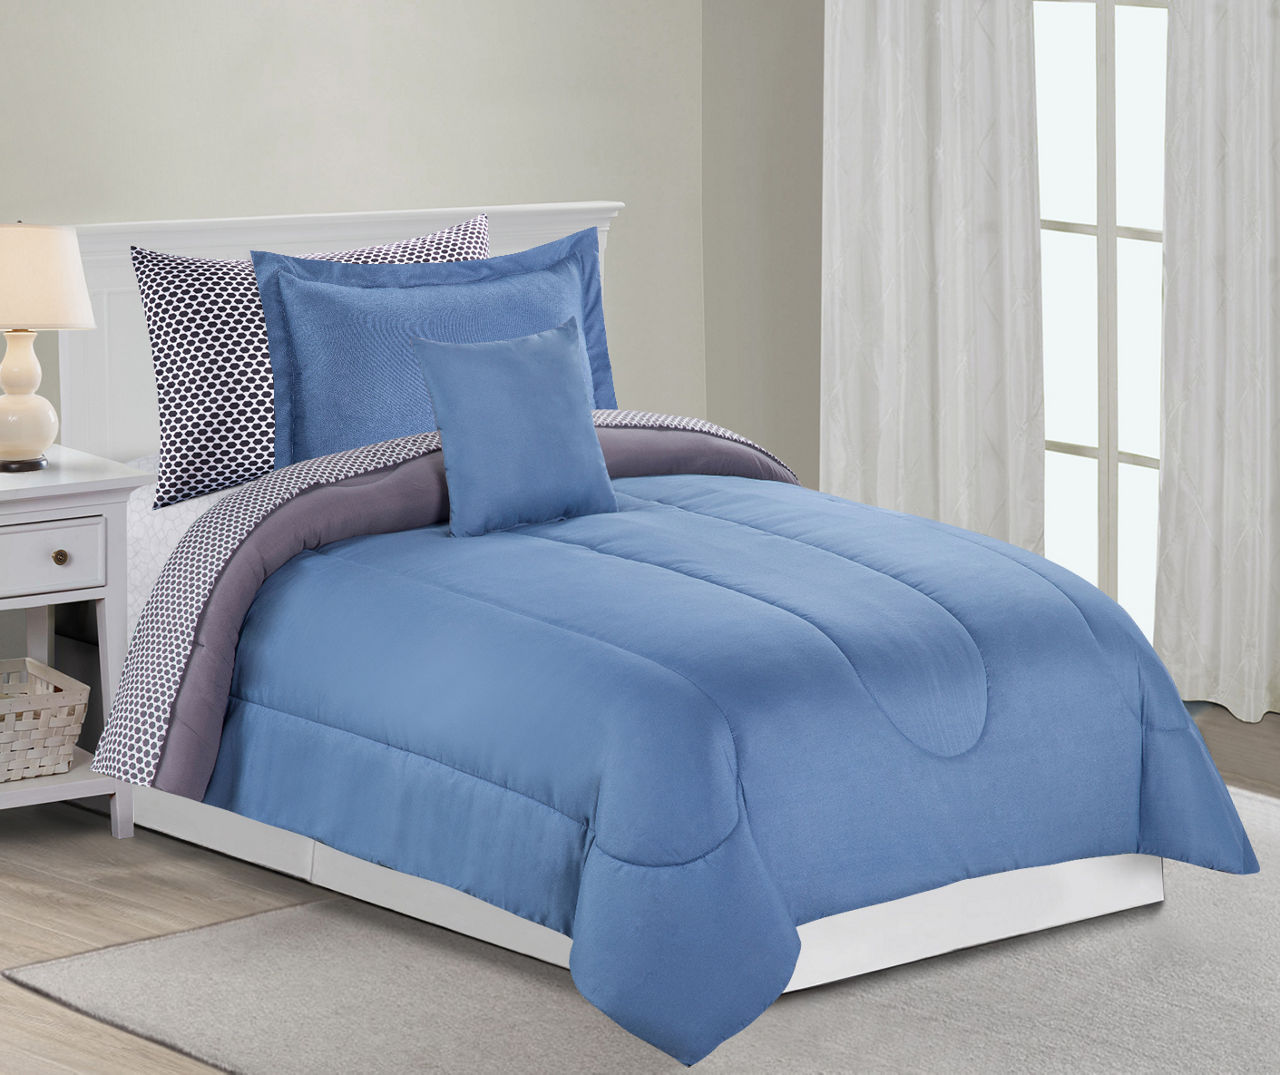 Solid Blue & Gray Twin 6-Piece Comforter Set